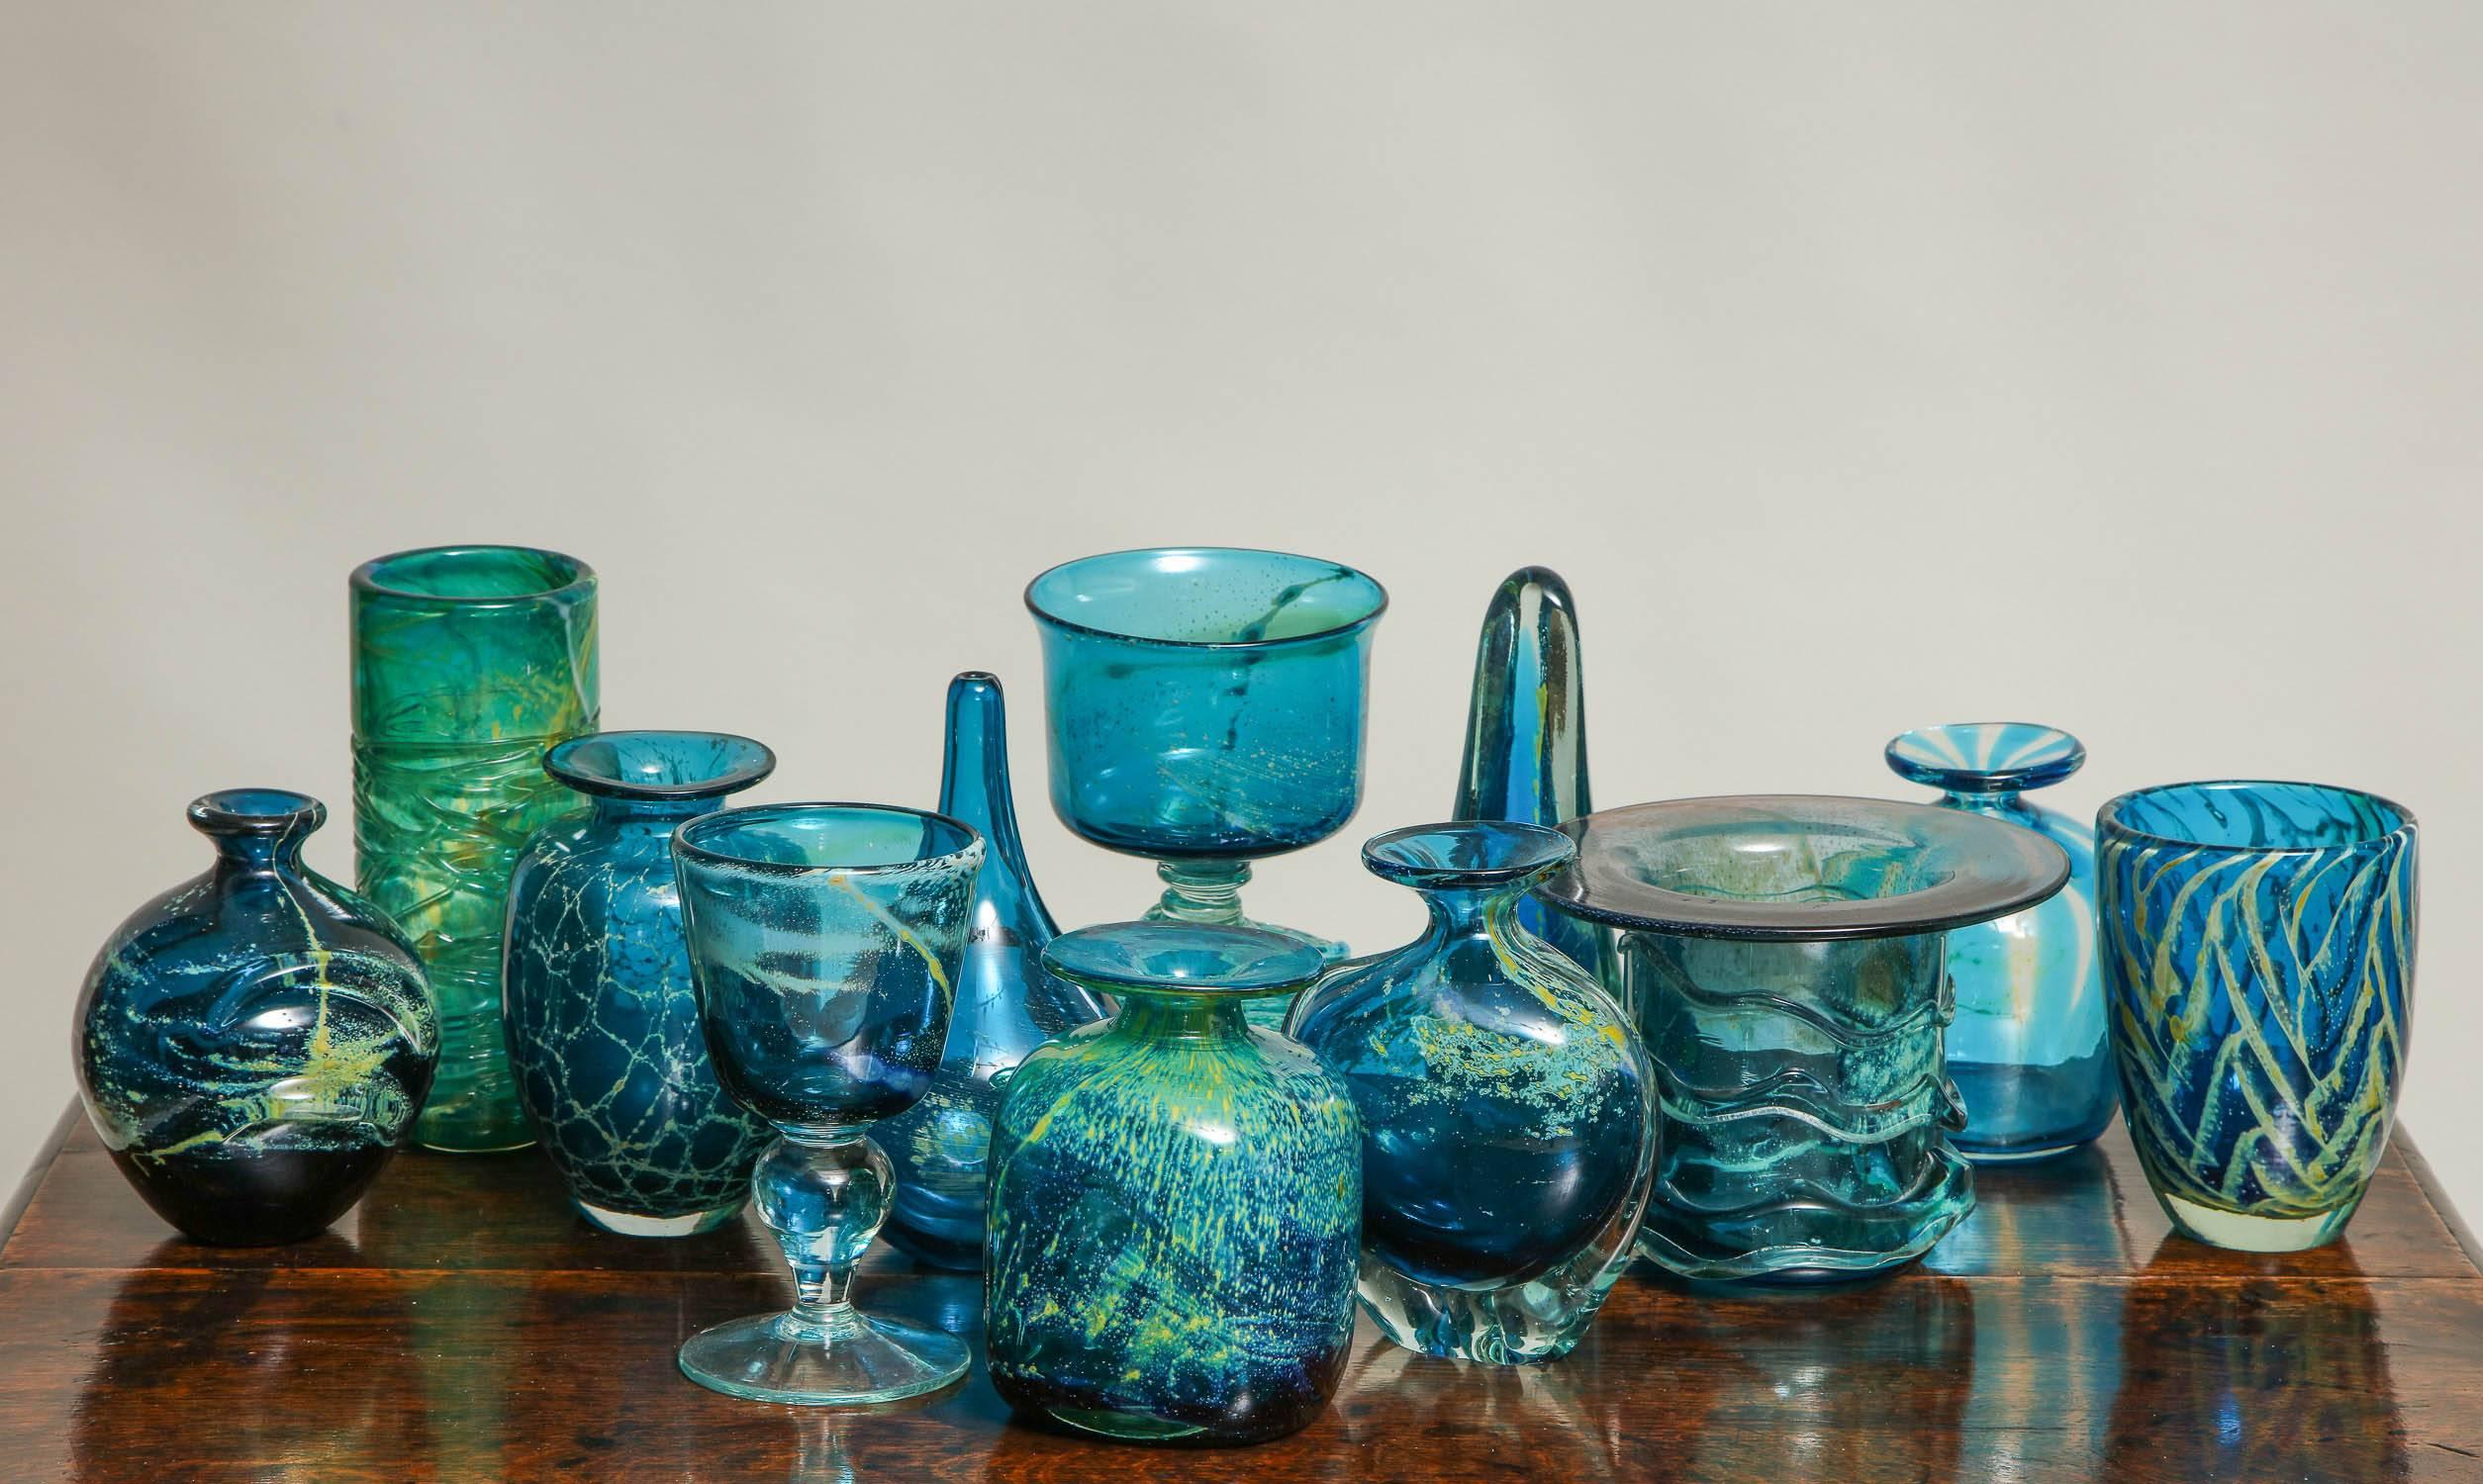 Fine collection of 1960s-1970s studio art glass from Malta, in rich deep blues, greens and gold’s from Mdina, the glass works established on the island in the 1960s by English glass artist Michael Harris.  Price below for entire collection of 12